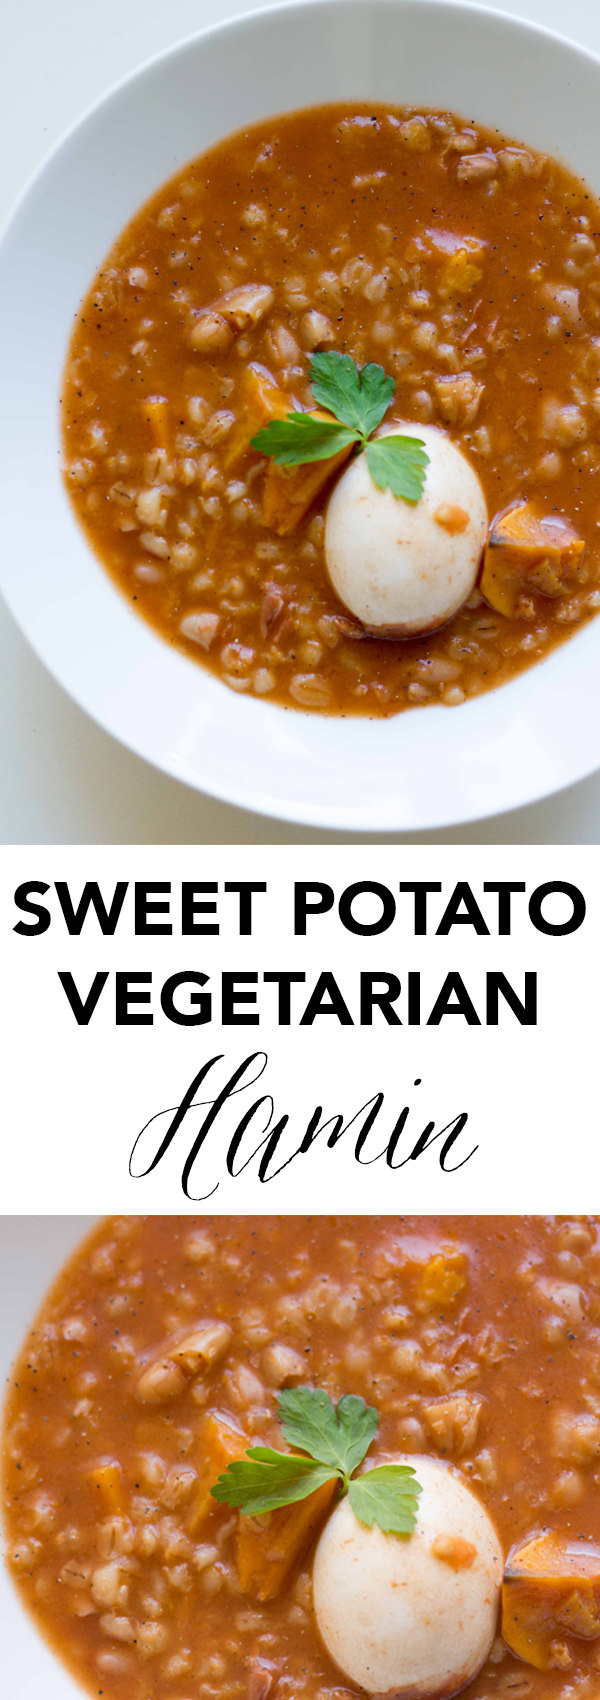 This vegetarian slow cooker version of Hamin, the traditional Jewish stew, is made with hearty sweet potatoes, barley, white beans and tomato sauce. It's the perfect winter comfort food! www.seriousspice.com